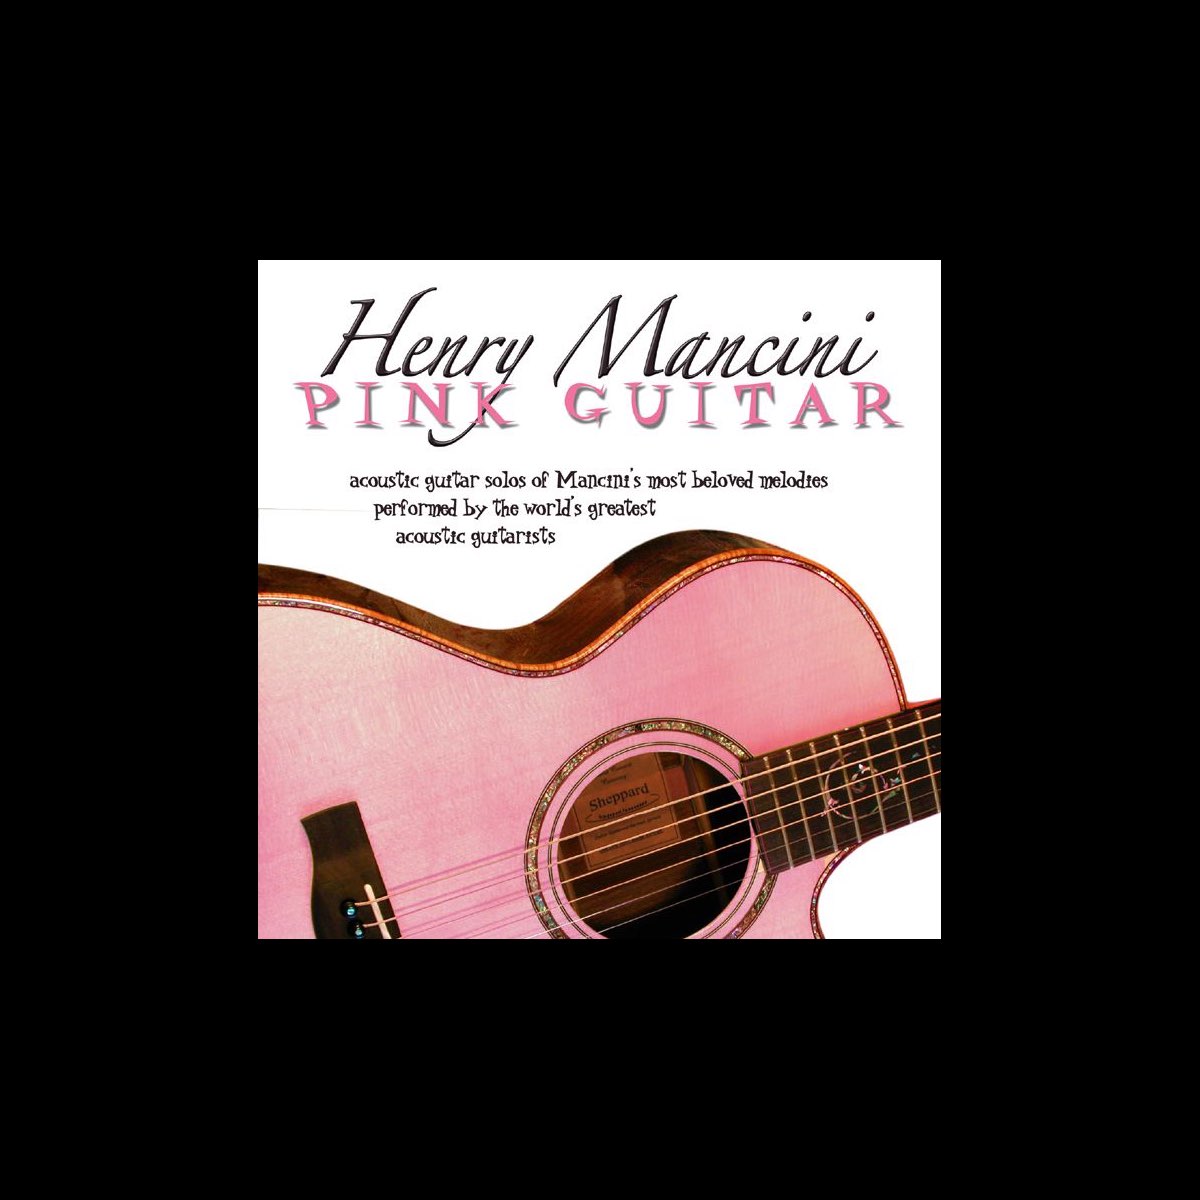 Henry Mancini: Pink Guitar by Various Artists on Apple Music